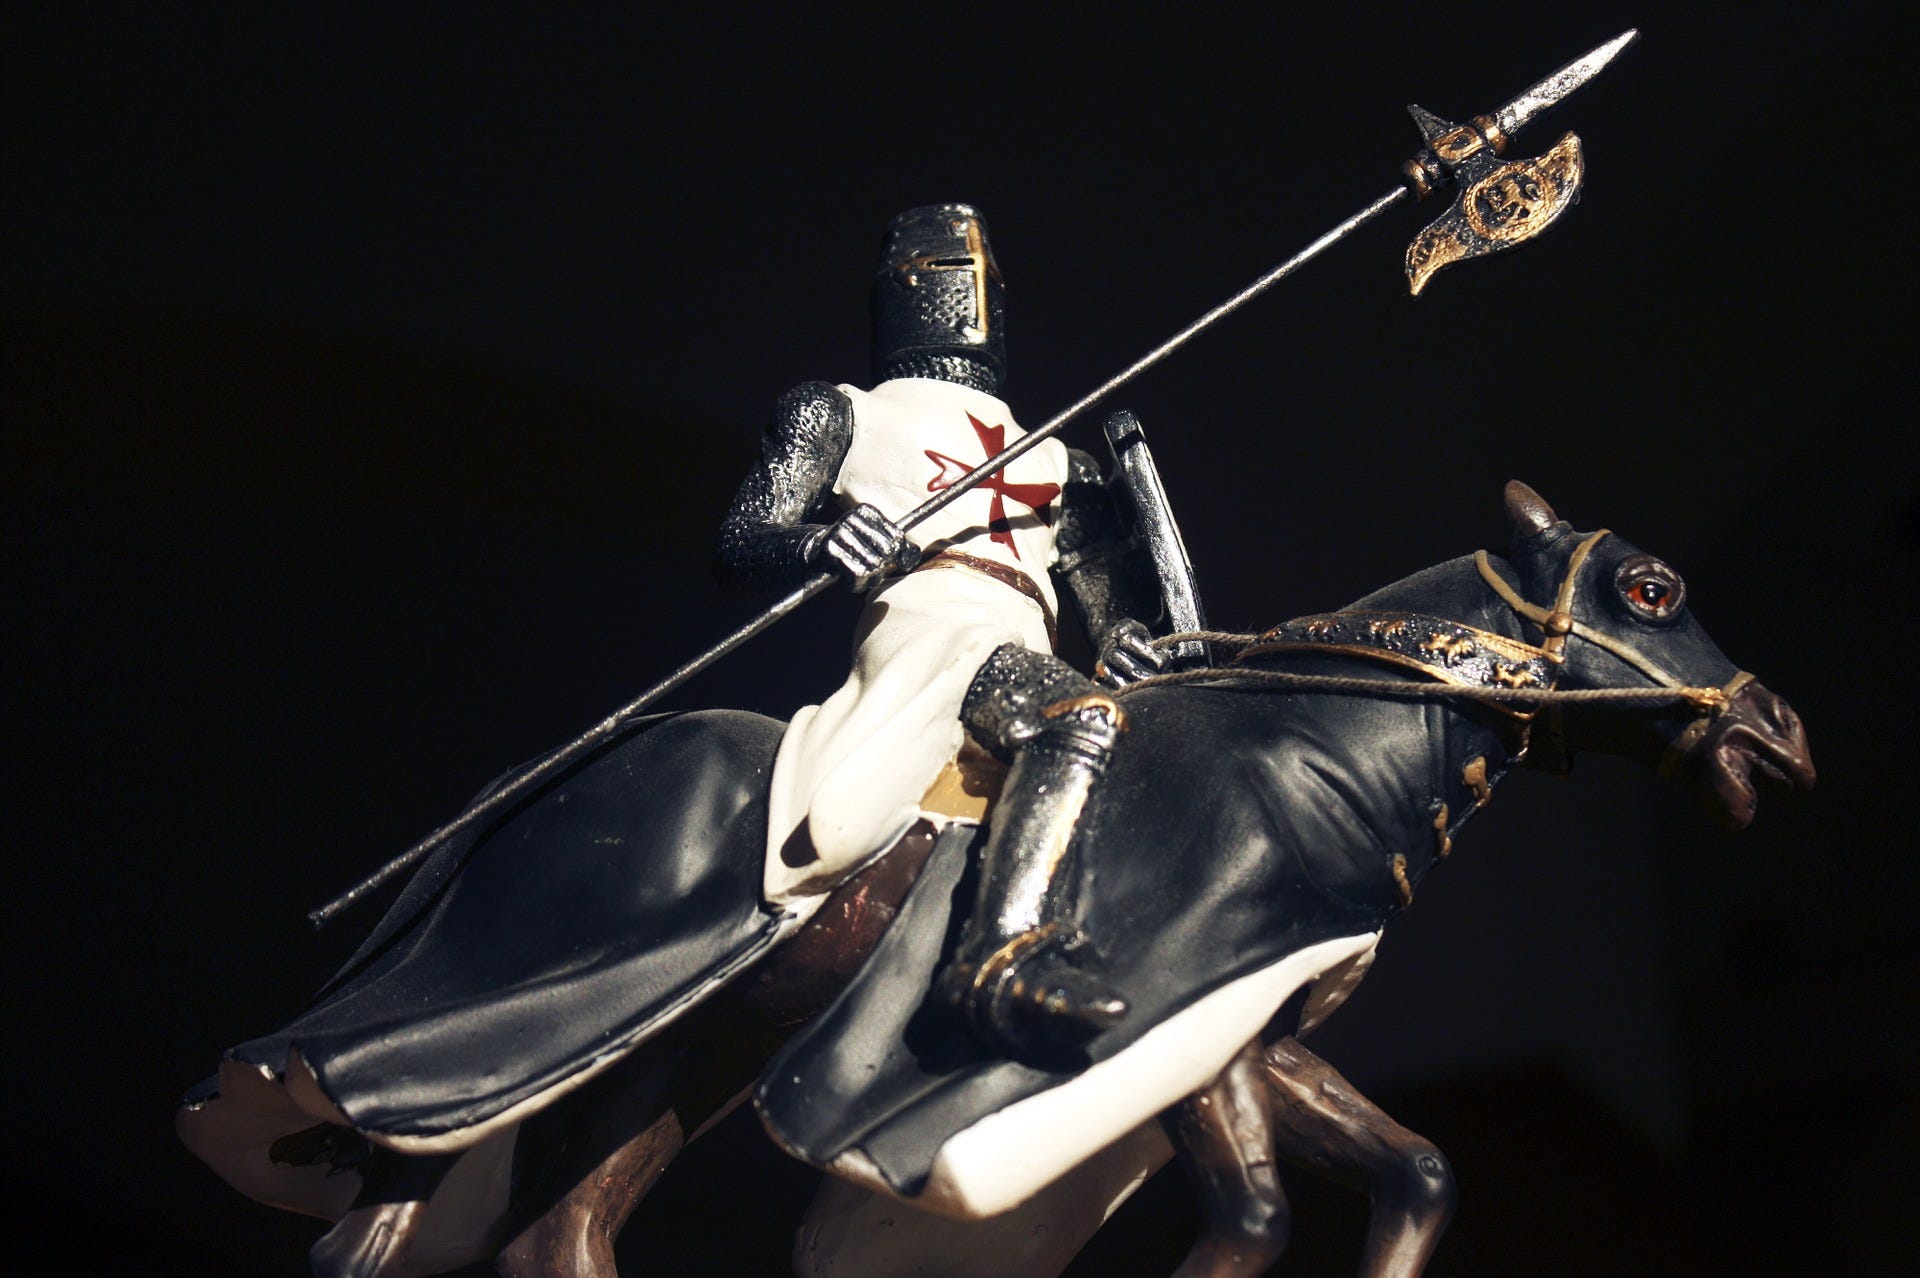 A crusader on a horse armed for battle.